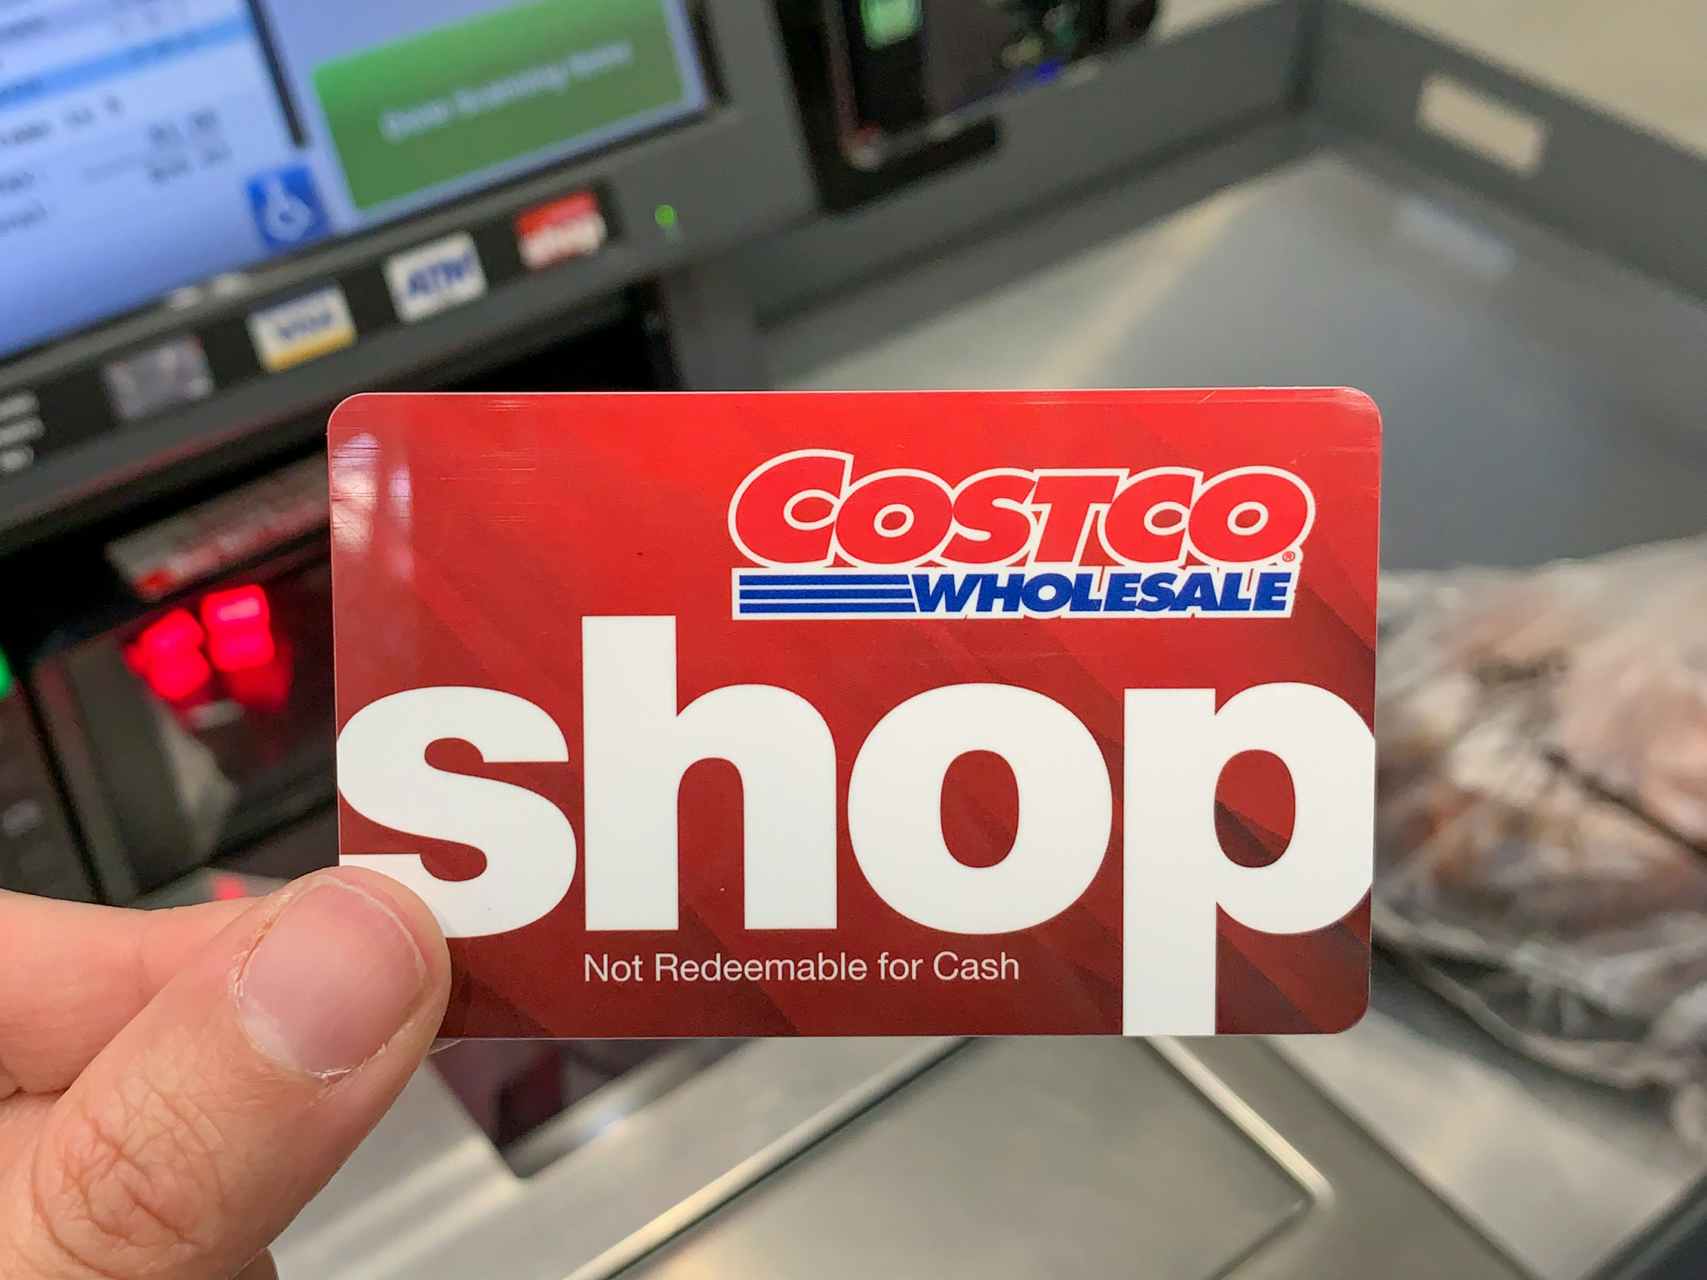 How To Buy Gift Cards in Bulk at Costco